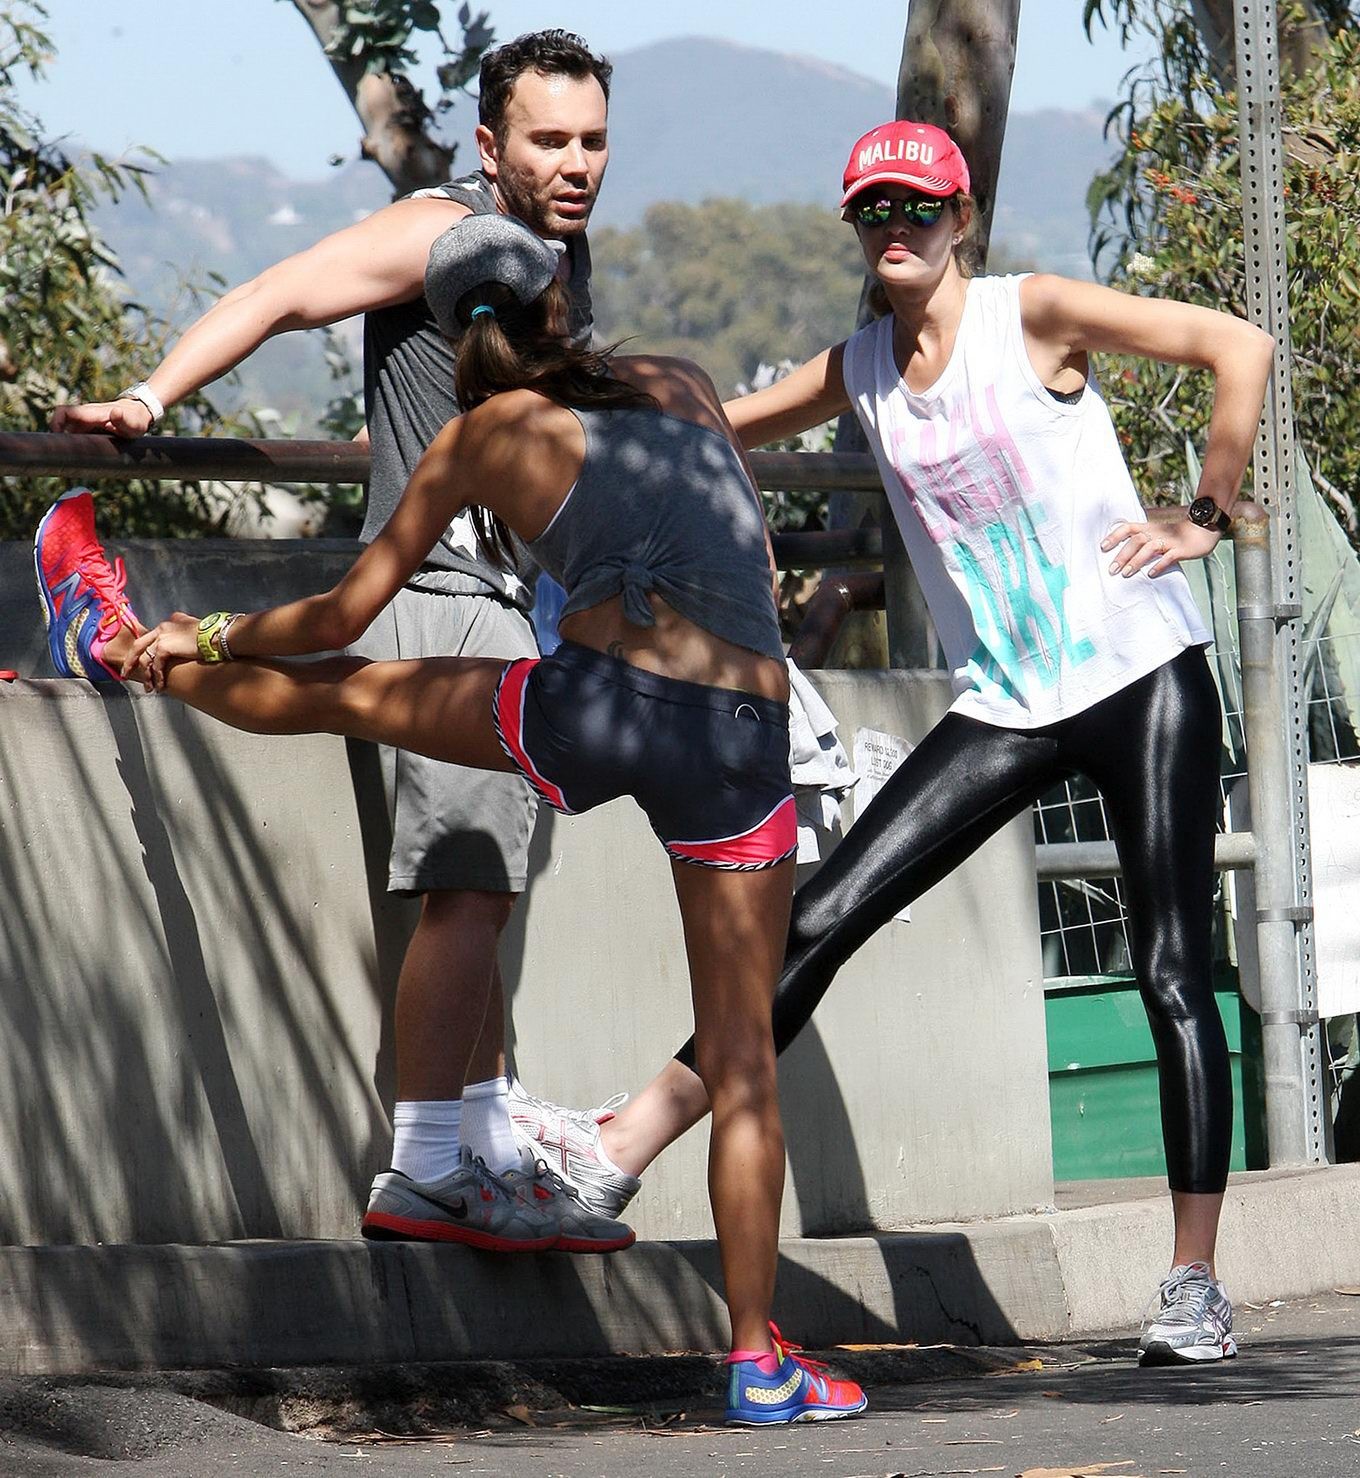 Alessandra Ambrosio and Ana Beatriz Barros stretching and hiking out in LA #75215772